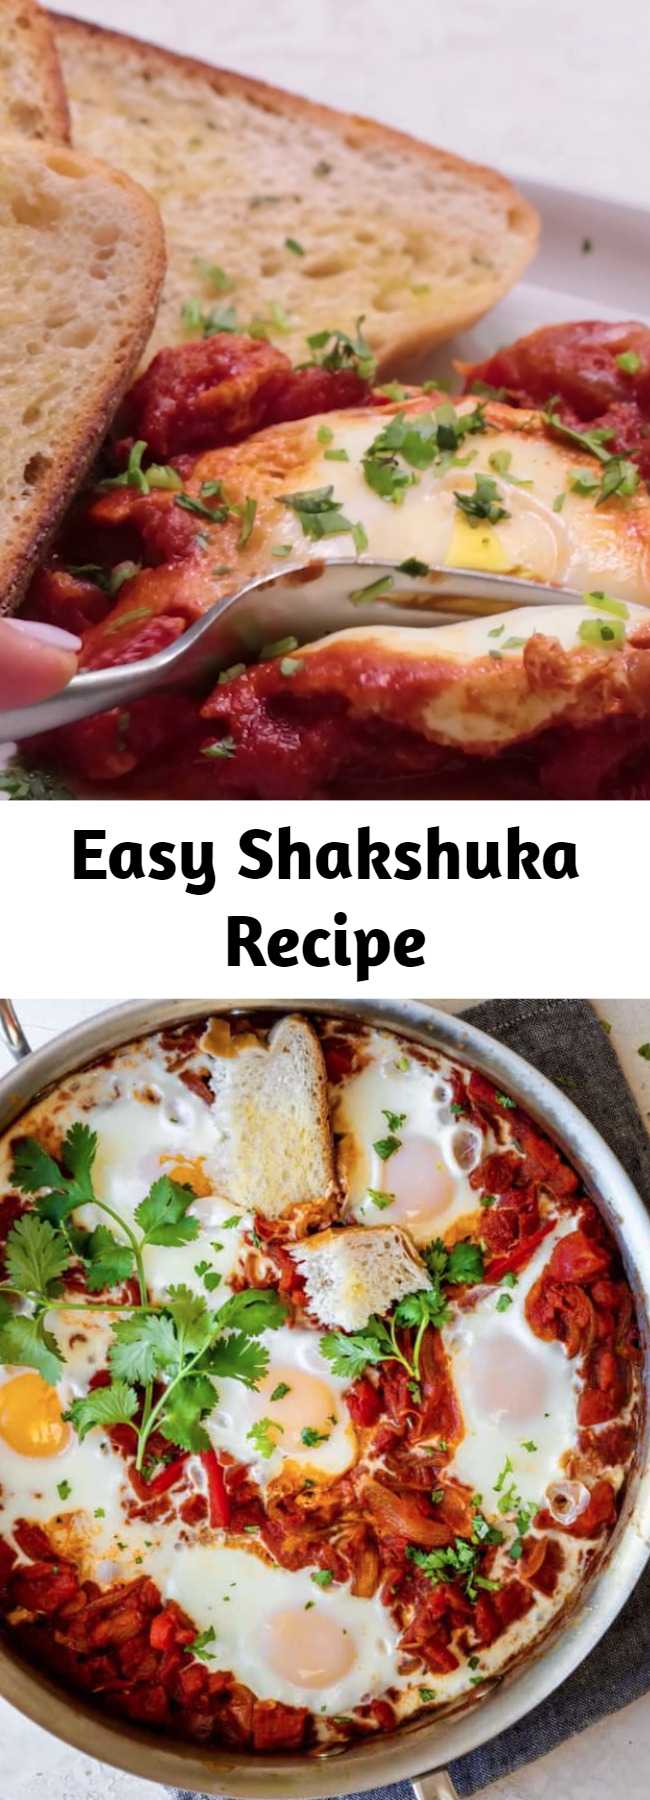 Easy Shakshuka Recipe - This Shakshuka Recipe is a popular Middle Eastern breakfast that is basically poached eggs in a spicy tomato sauce - it's vegetarian, easy and healthy! #breakfast